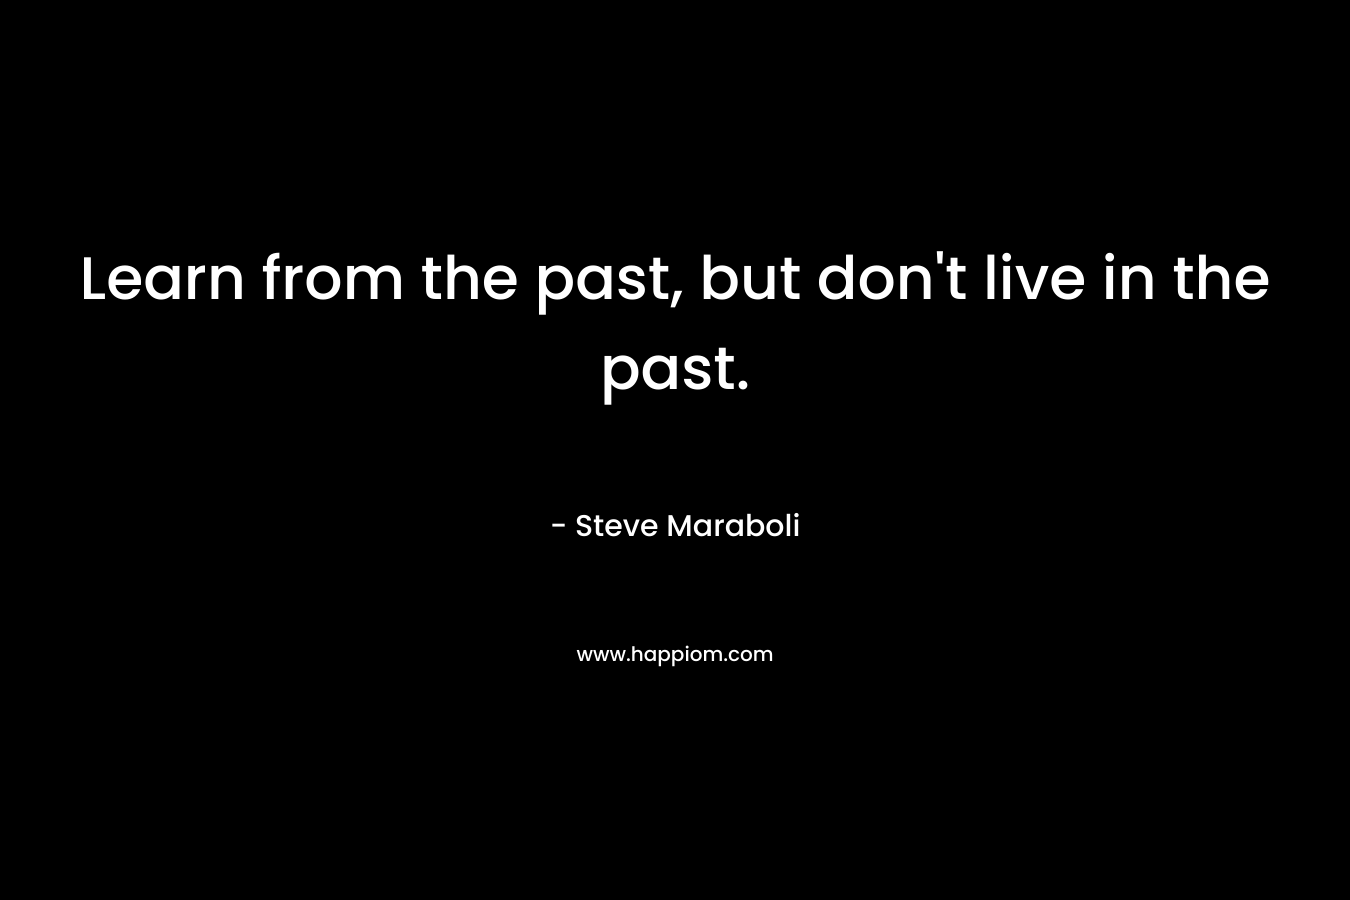 Learn from the past, but don't live in the past.